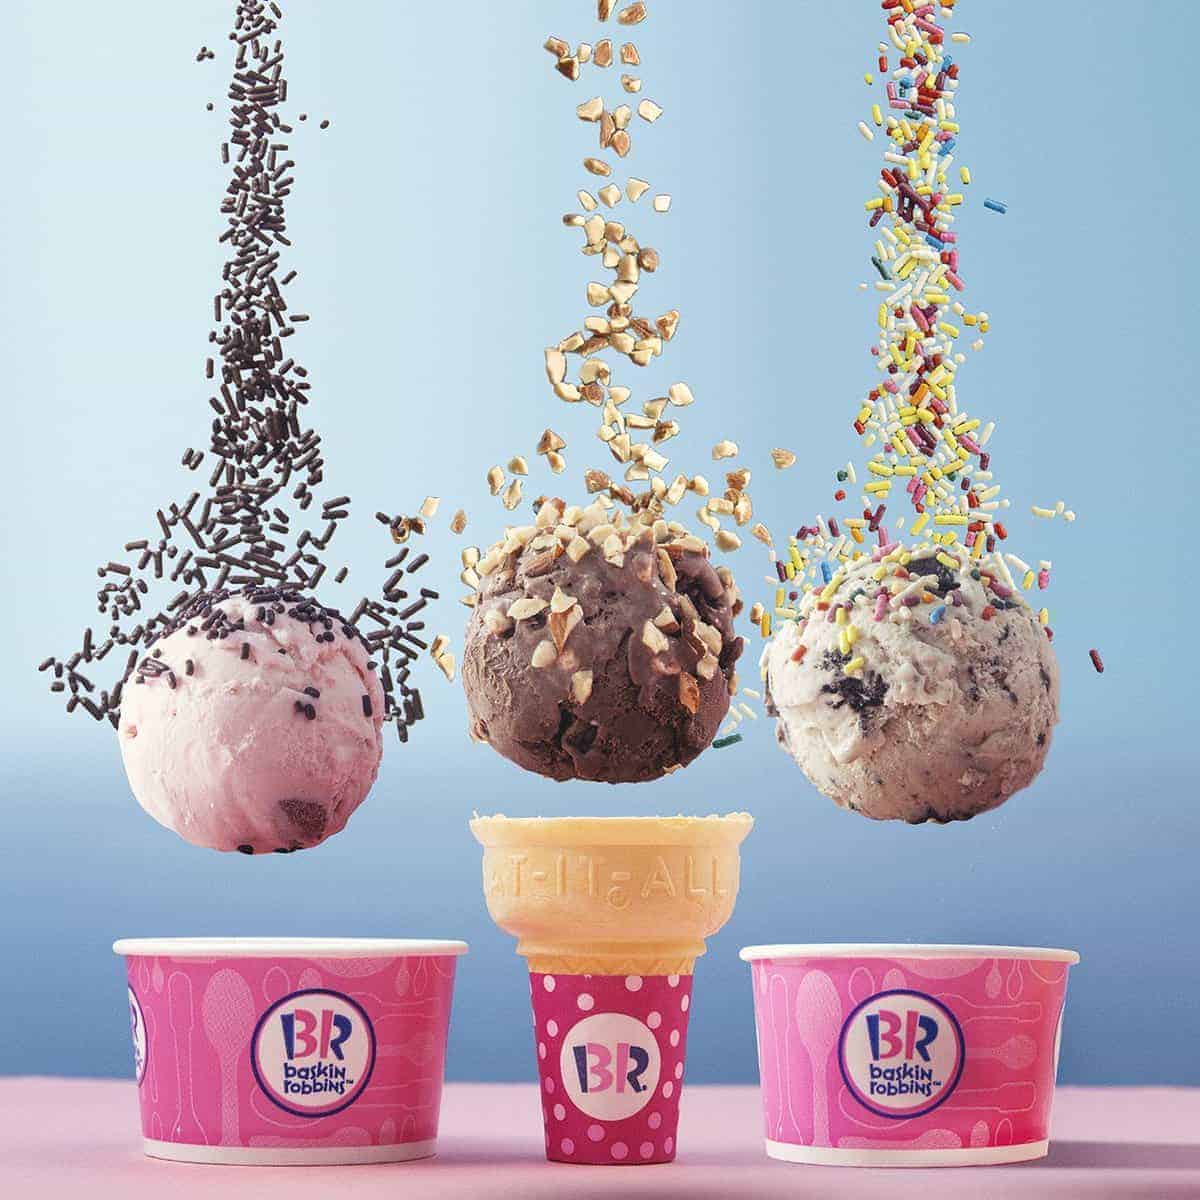 baskin-robbins-get-ice-cream-scoop-for-1-70-living-on-the-cheap